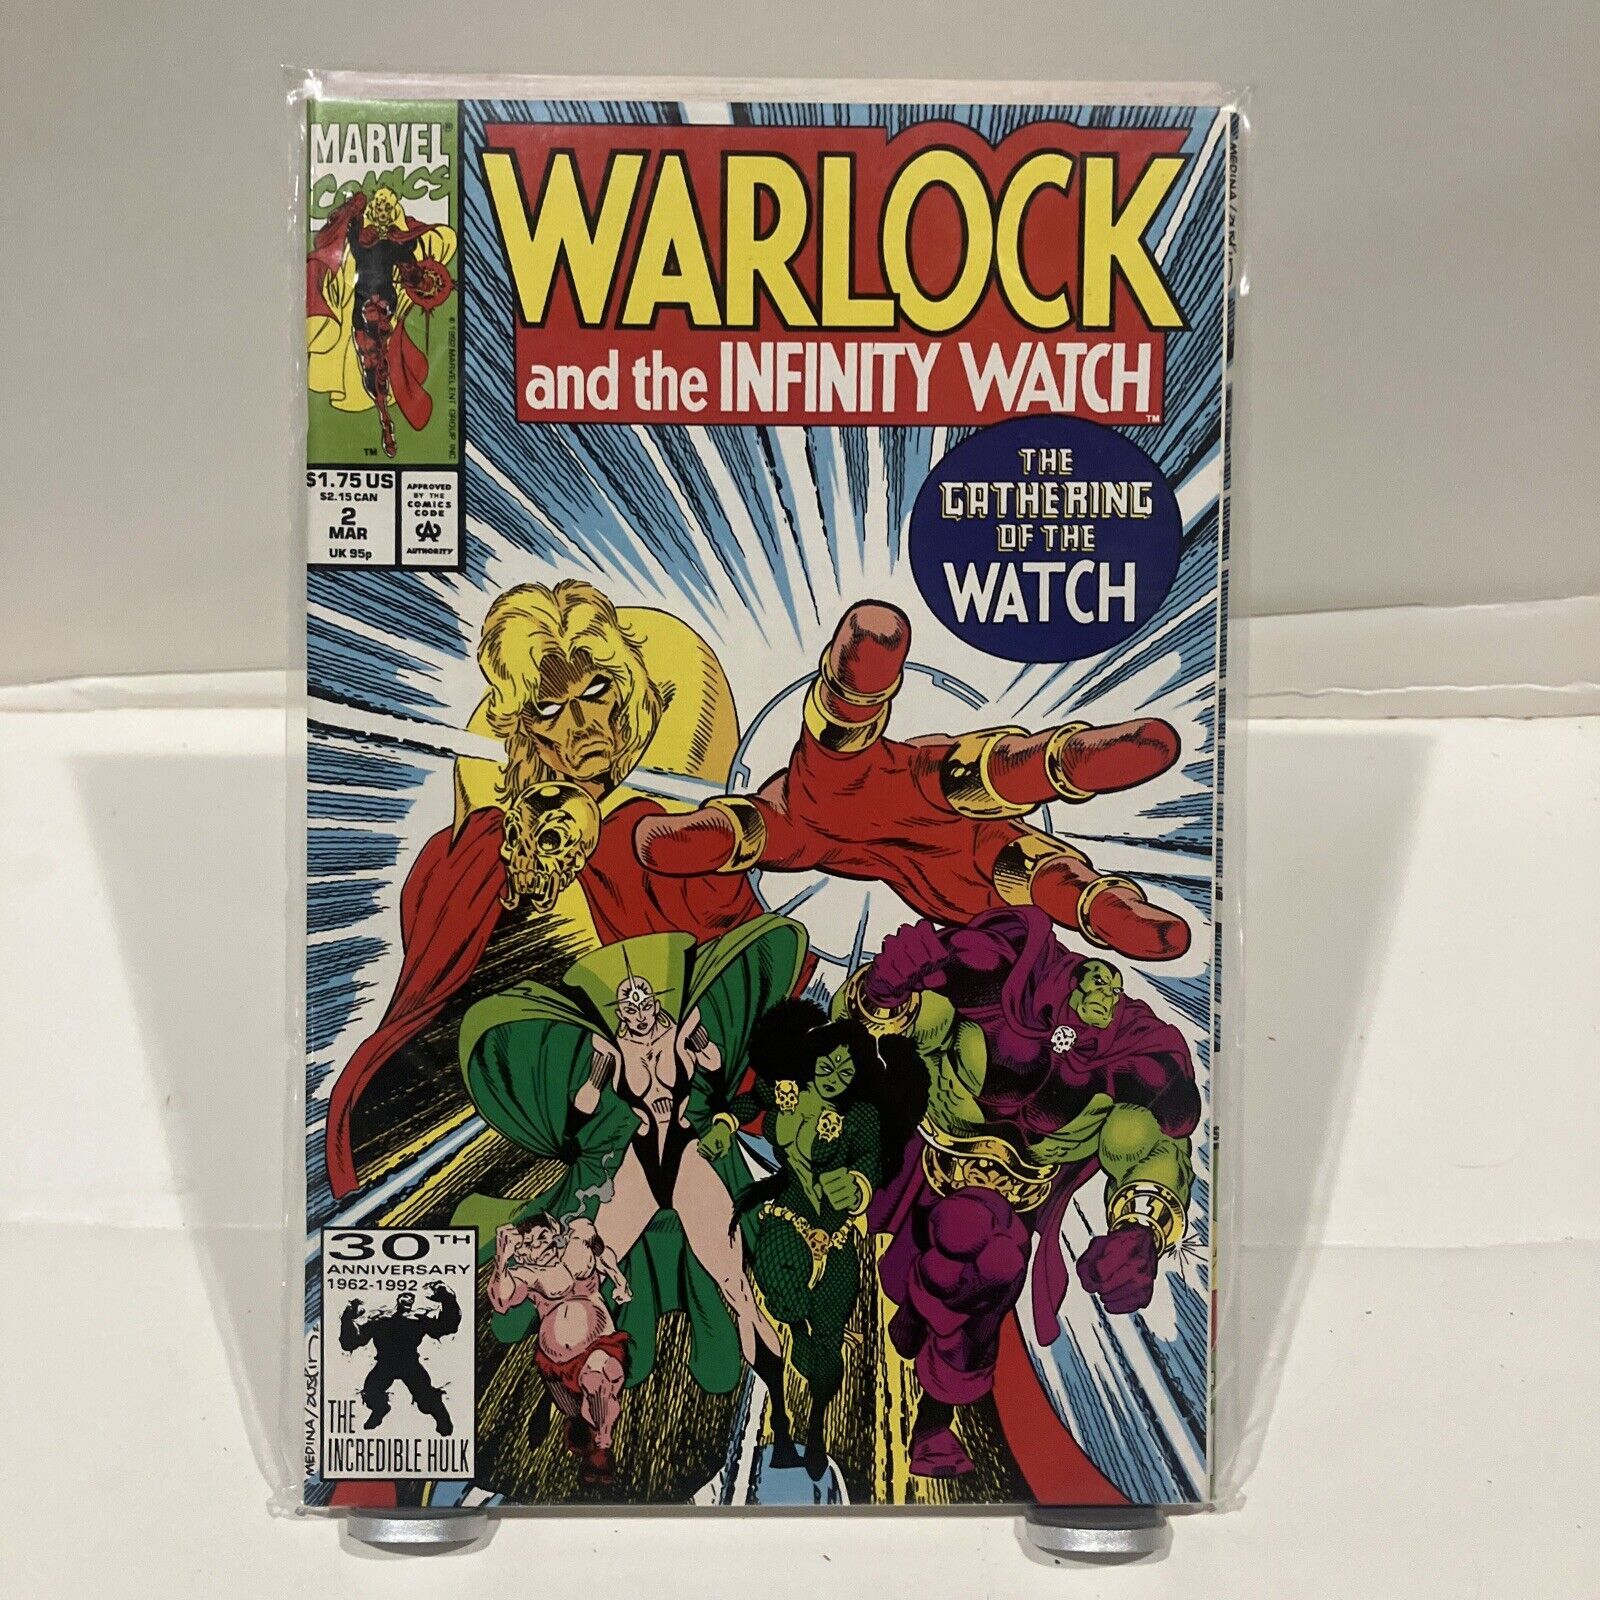 Warlock and the Infinity Watch #2 (Marvel, March 1992)